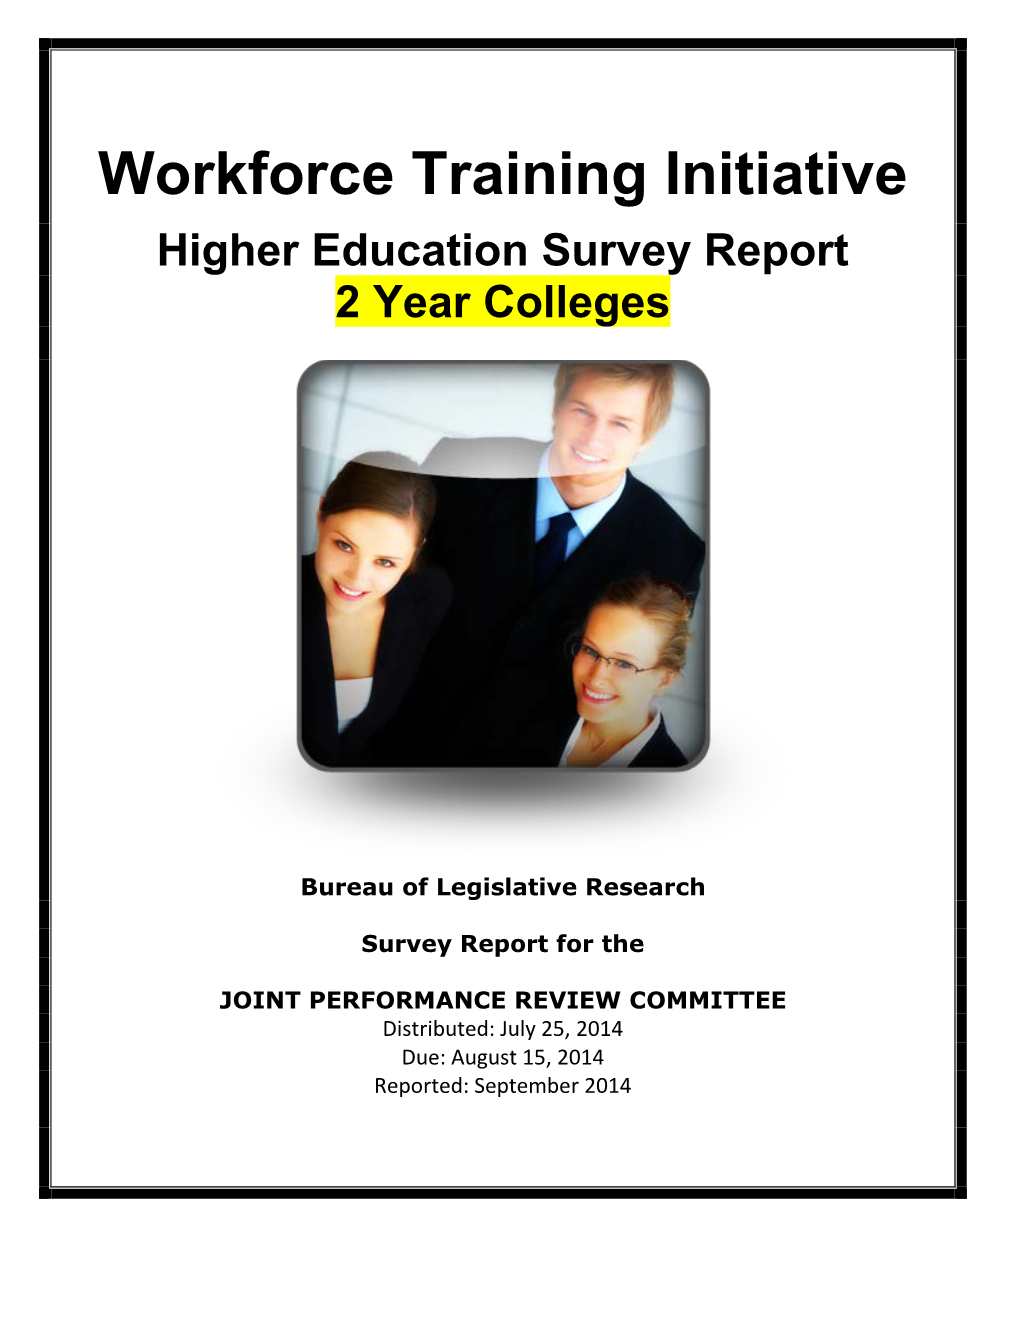 Workforce Training Initiative Higher Education Survey Report 2 Year Colleges